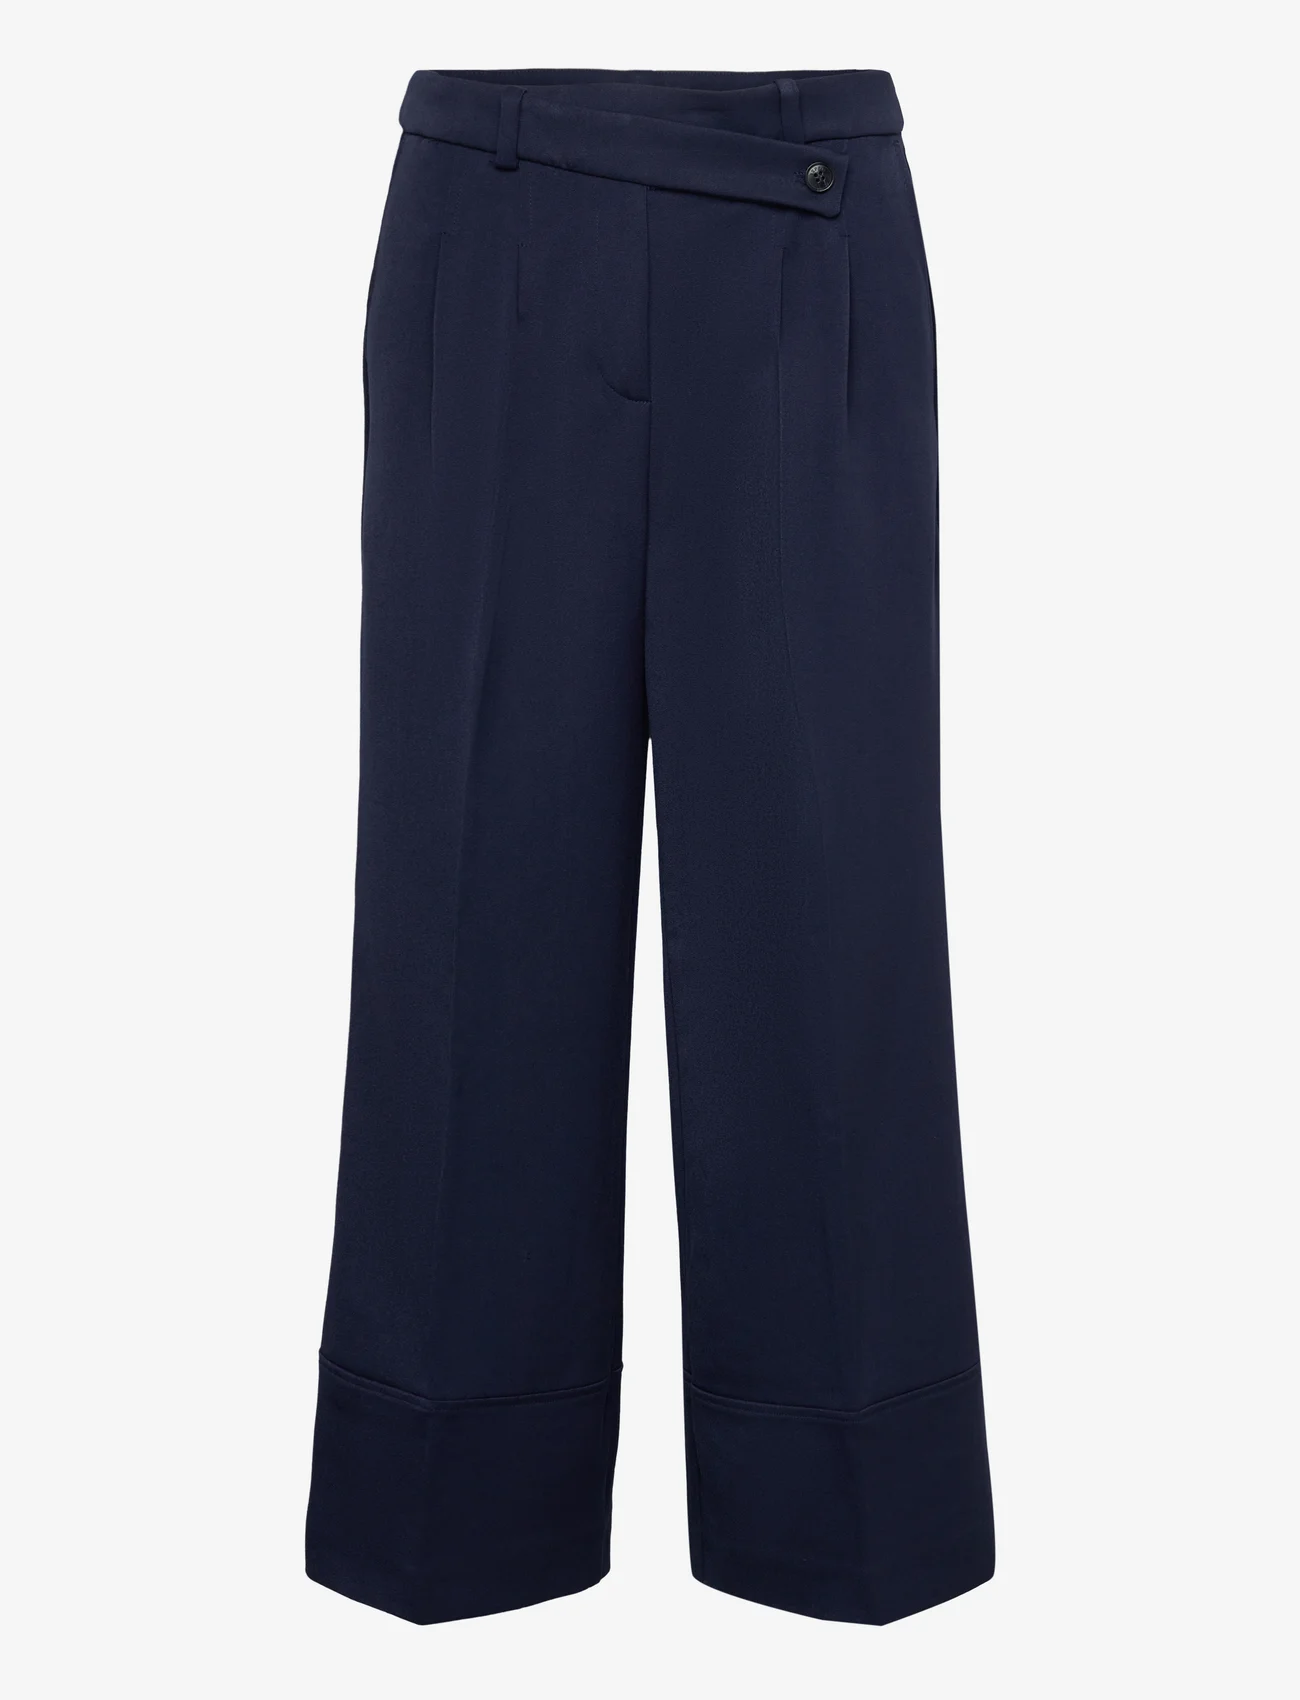 Esprit Casual - Culotte trousers with blended viscose - straight leg hosen - navy - 0